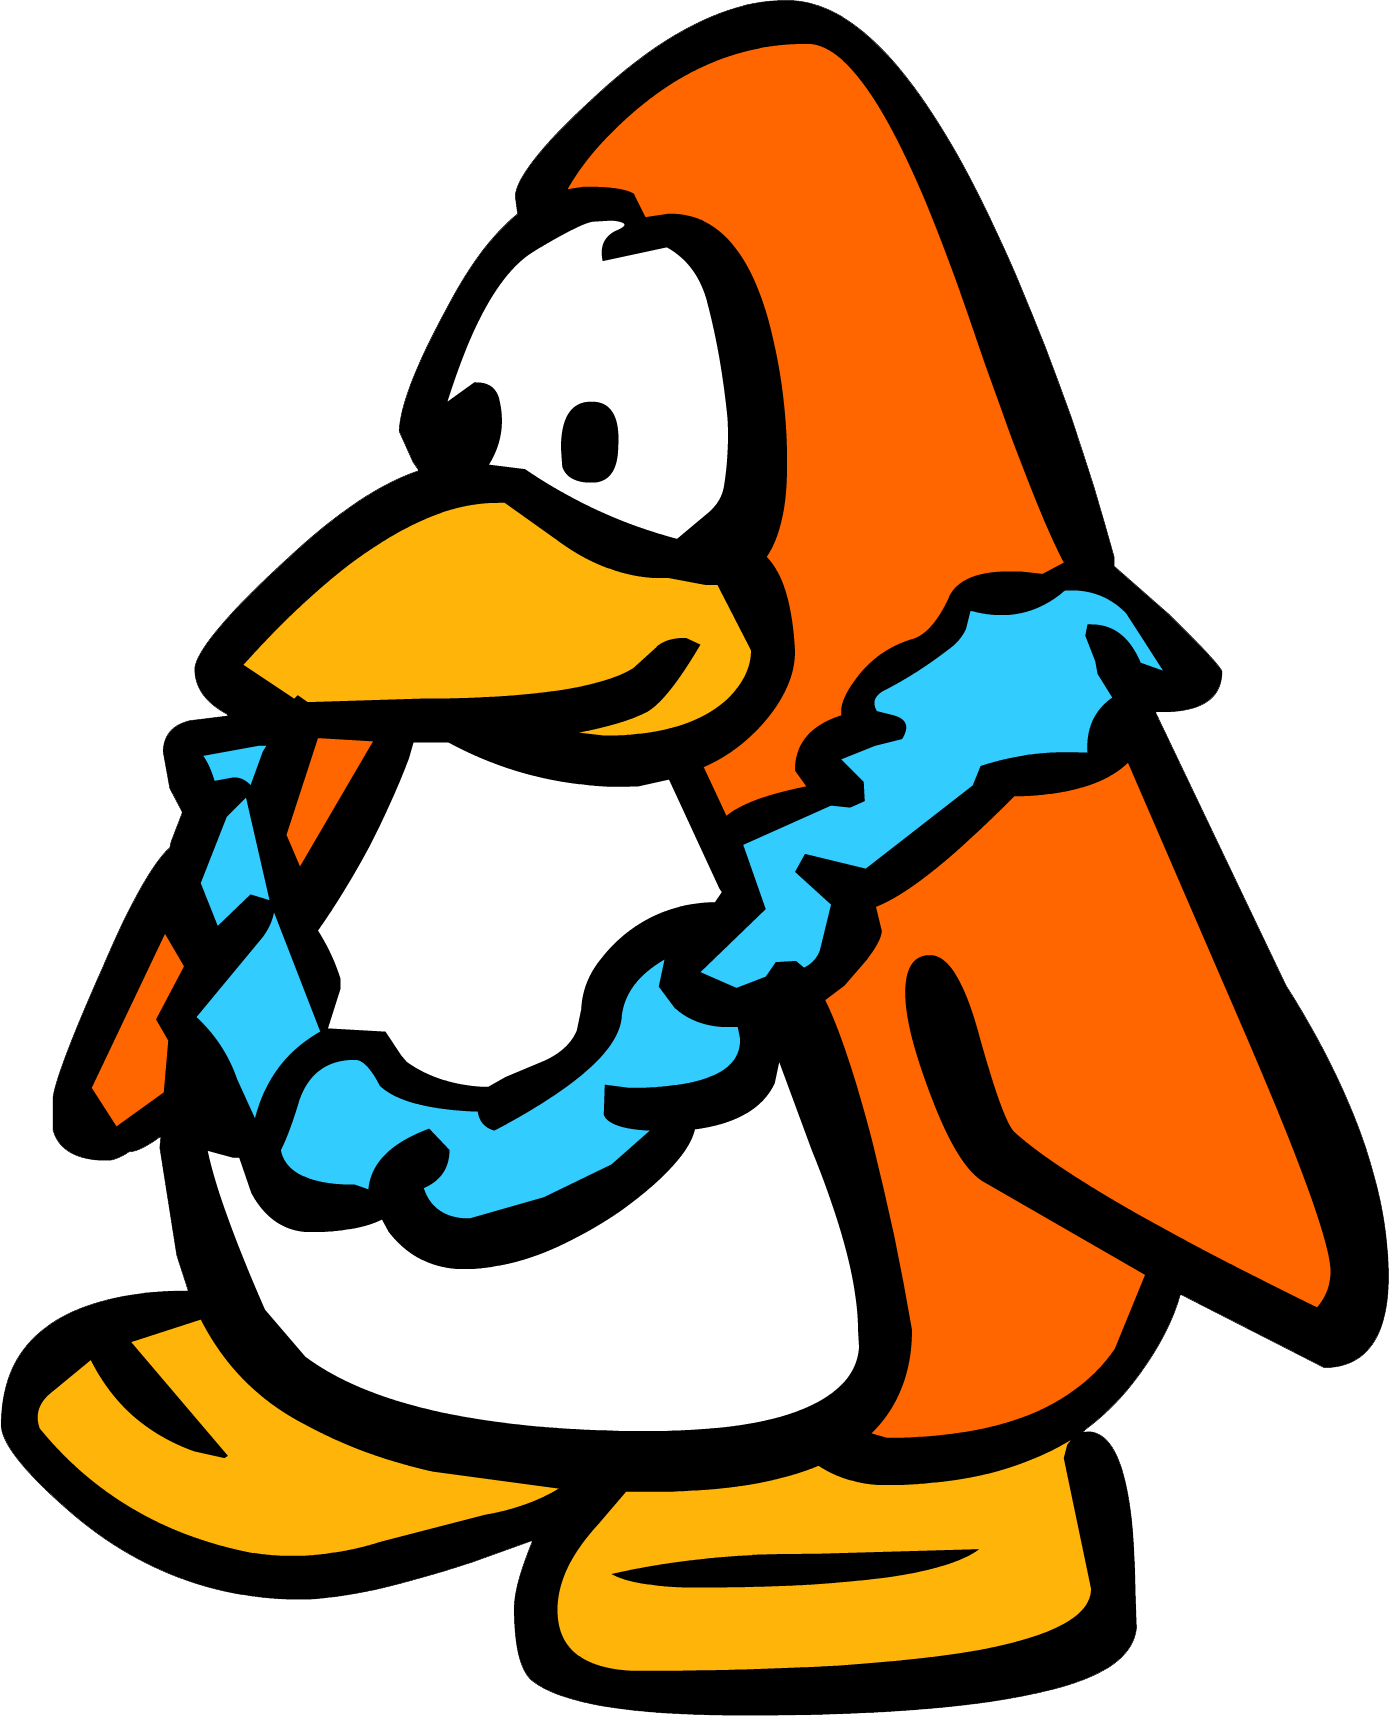 More From My Site - Club Penguin Blue Lei (1389x1716)